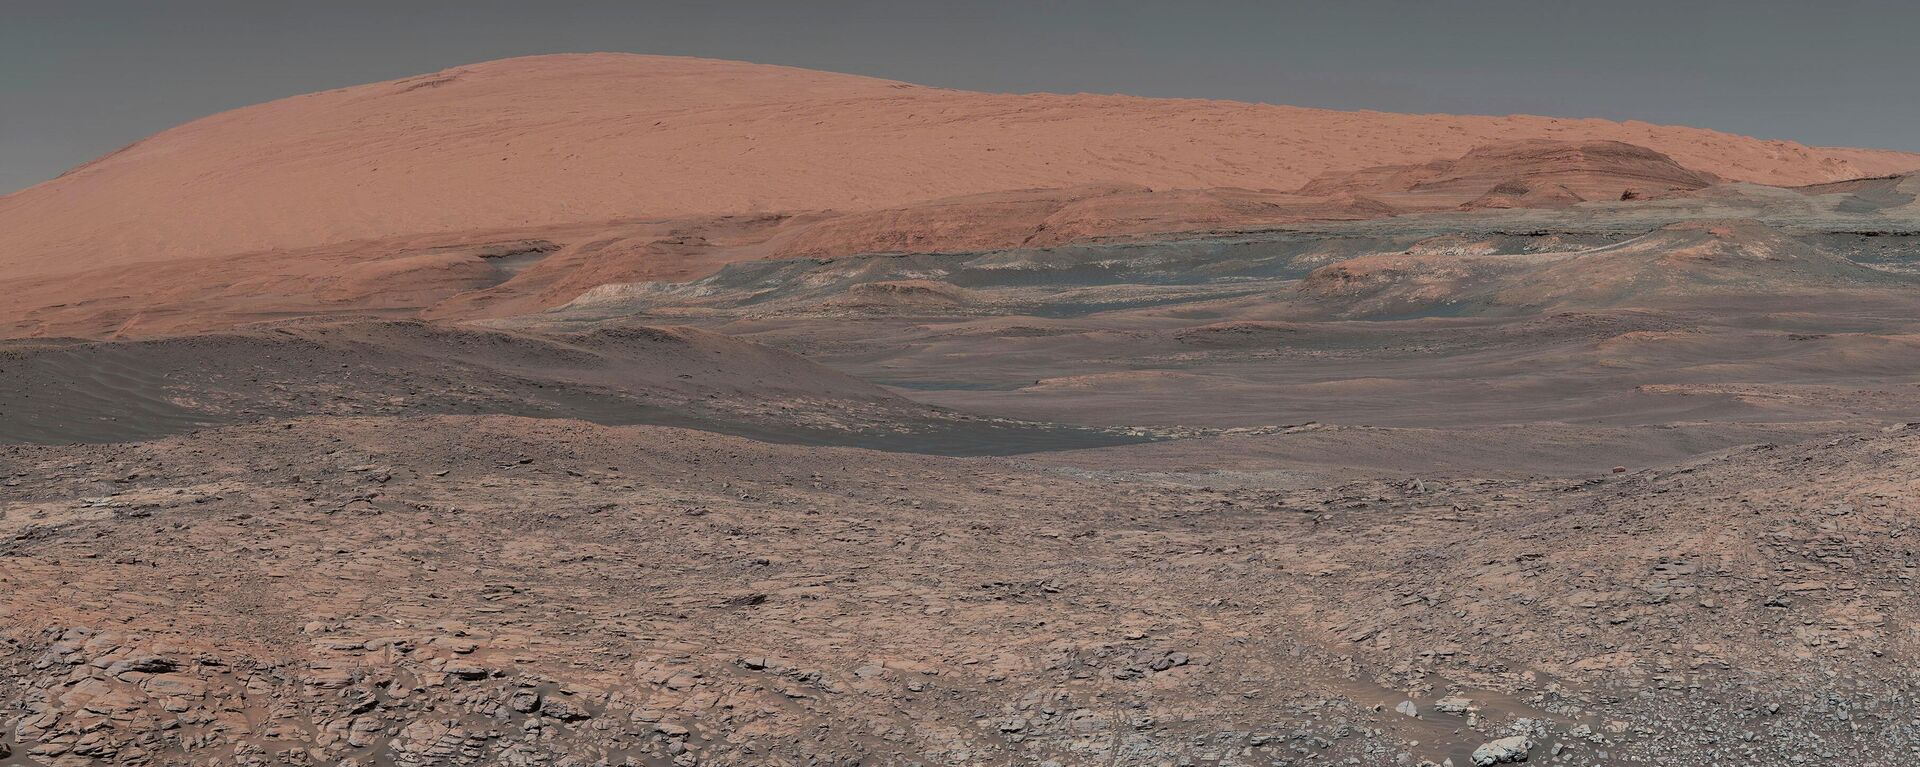 This image provided by NASA, assembled from a series of January 2018 photos made by the Mars Curiosity rover, shows an uphill view of Mount Sharp, which Curiosity had been climbing. - Sputnik International, 1920, 17.06.2022